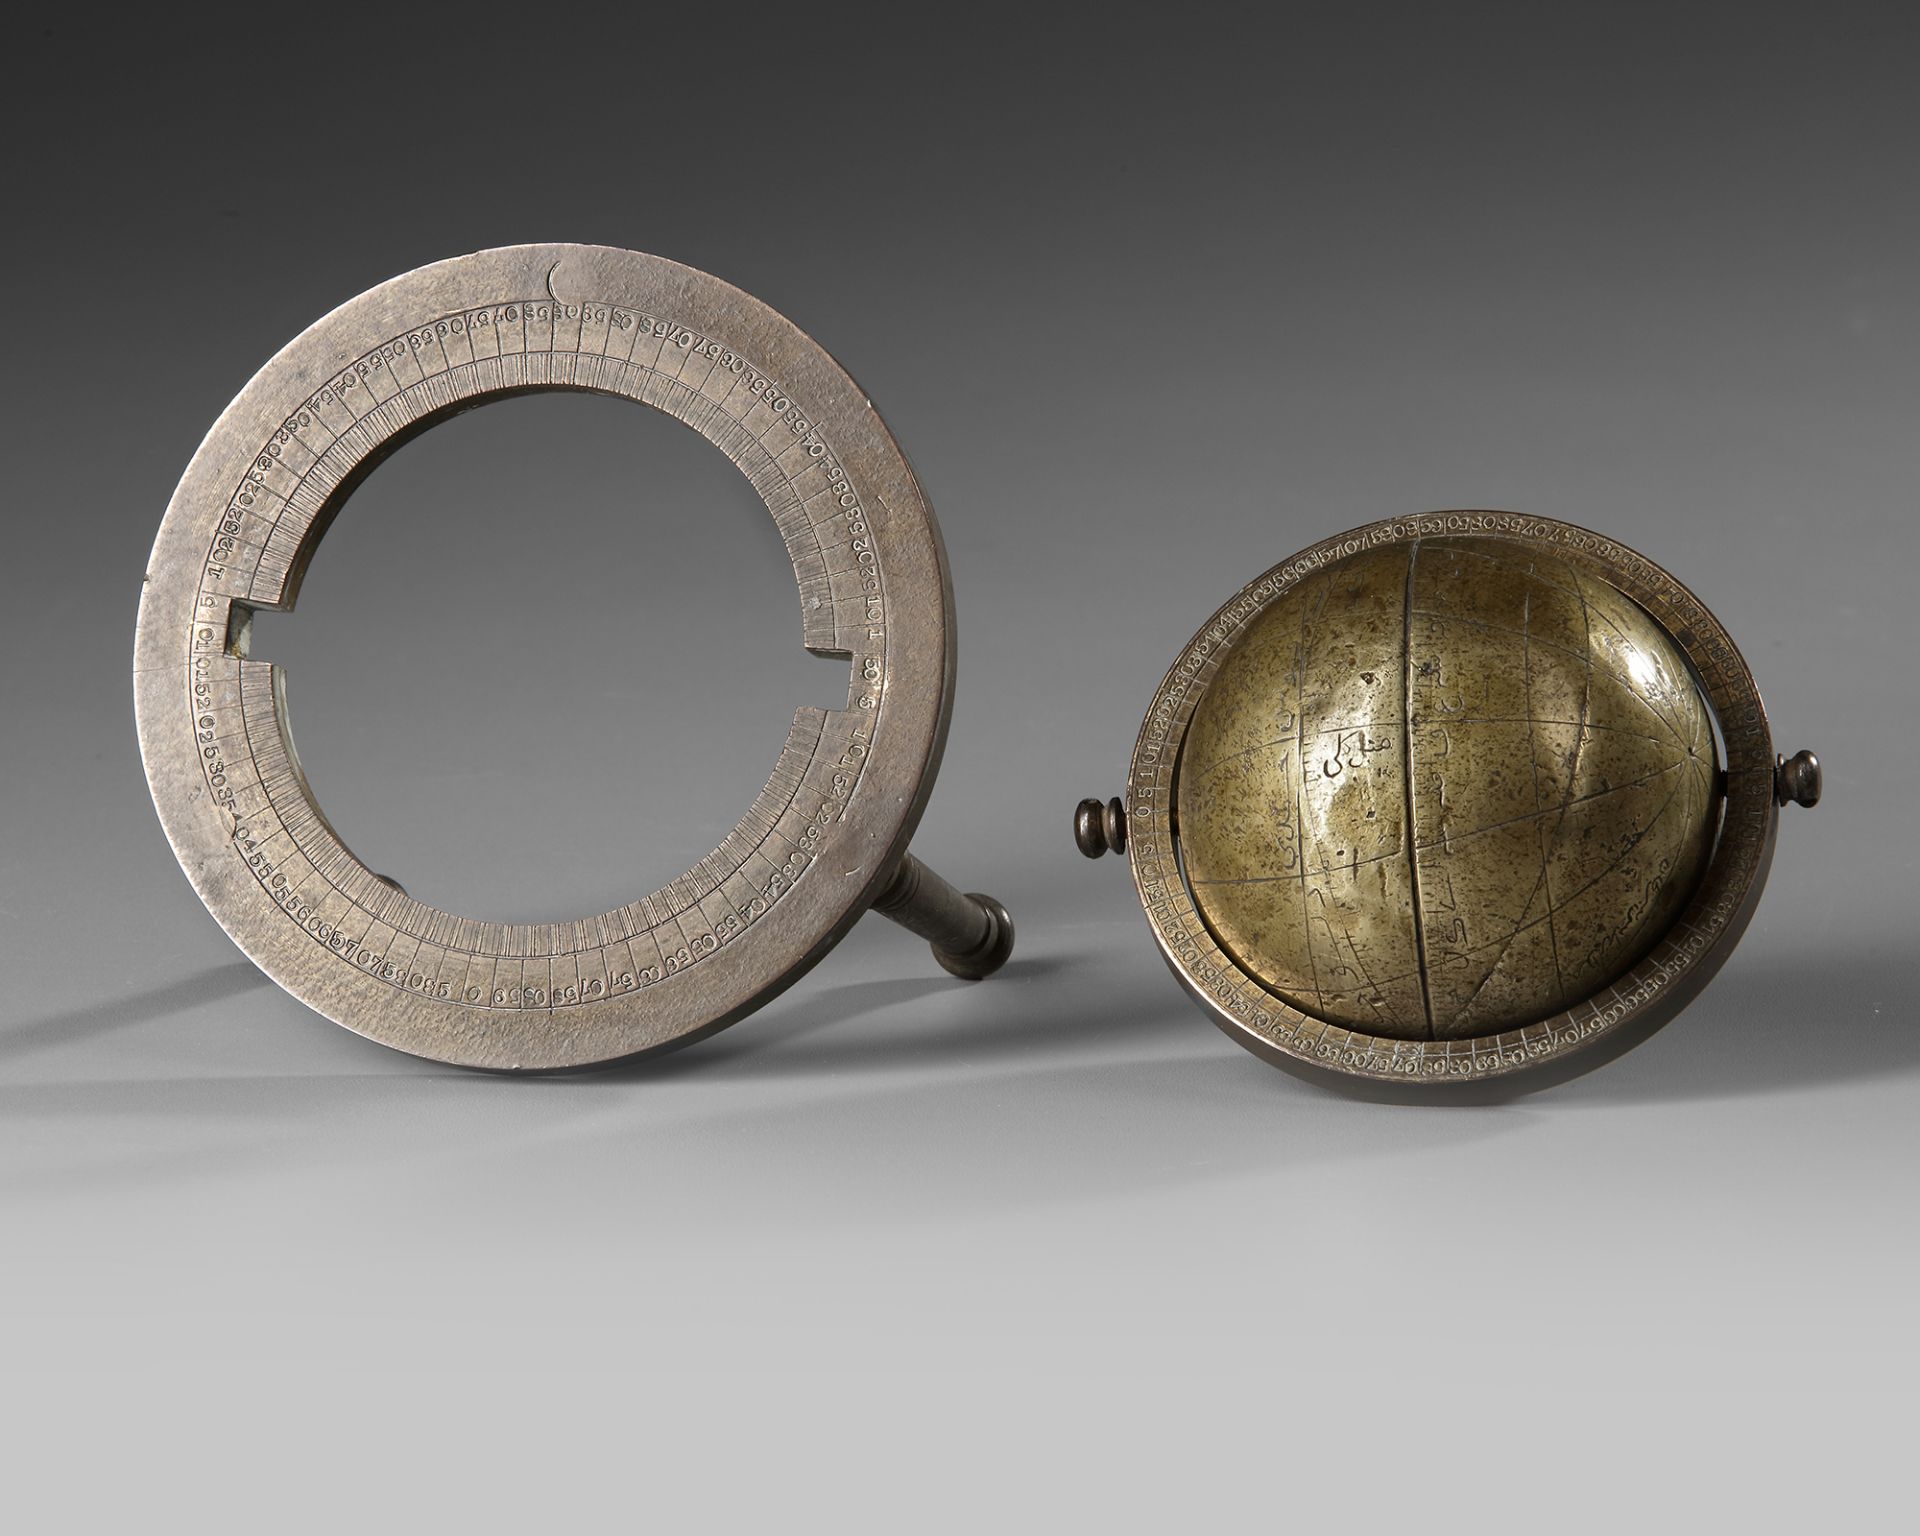 AN INDO-PERSIAN BRASS EASTERN ISLAMIC CELESTIAL GLOBE, INDO-PERSIAN LATE 17TH-EARLY 18TH CENTURY - Image 3 of 3